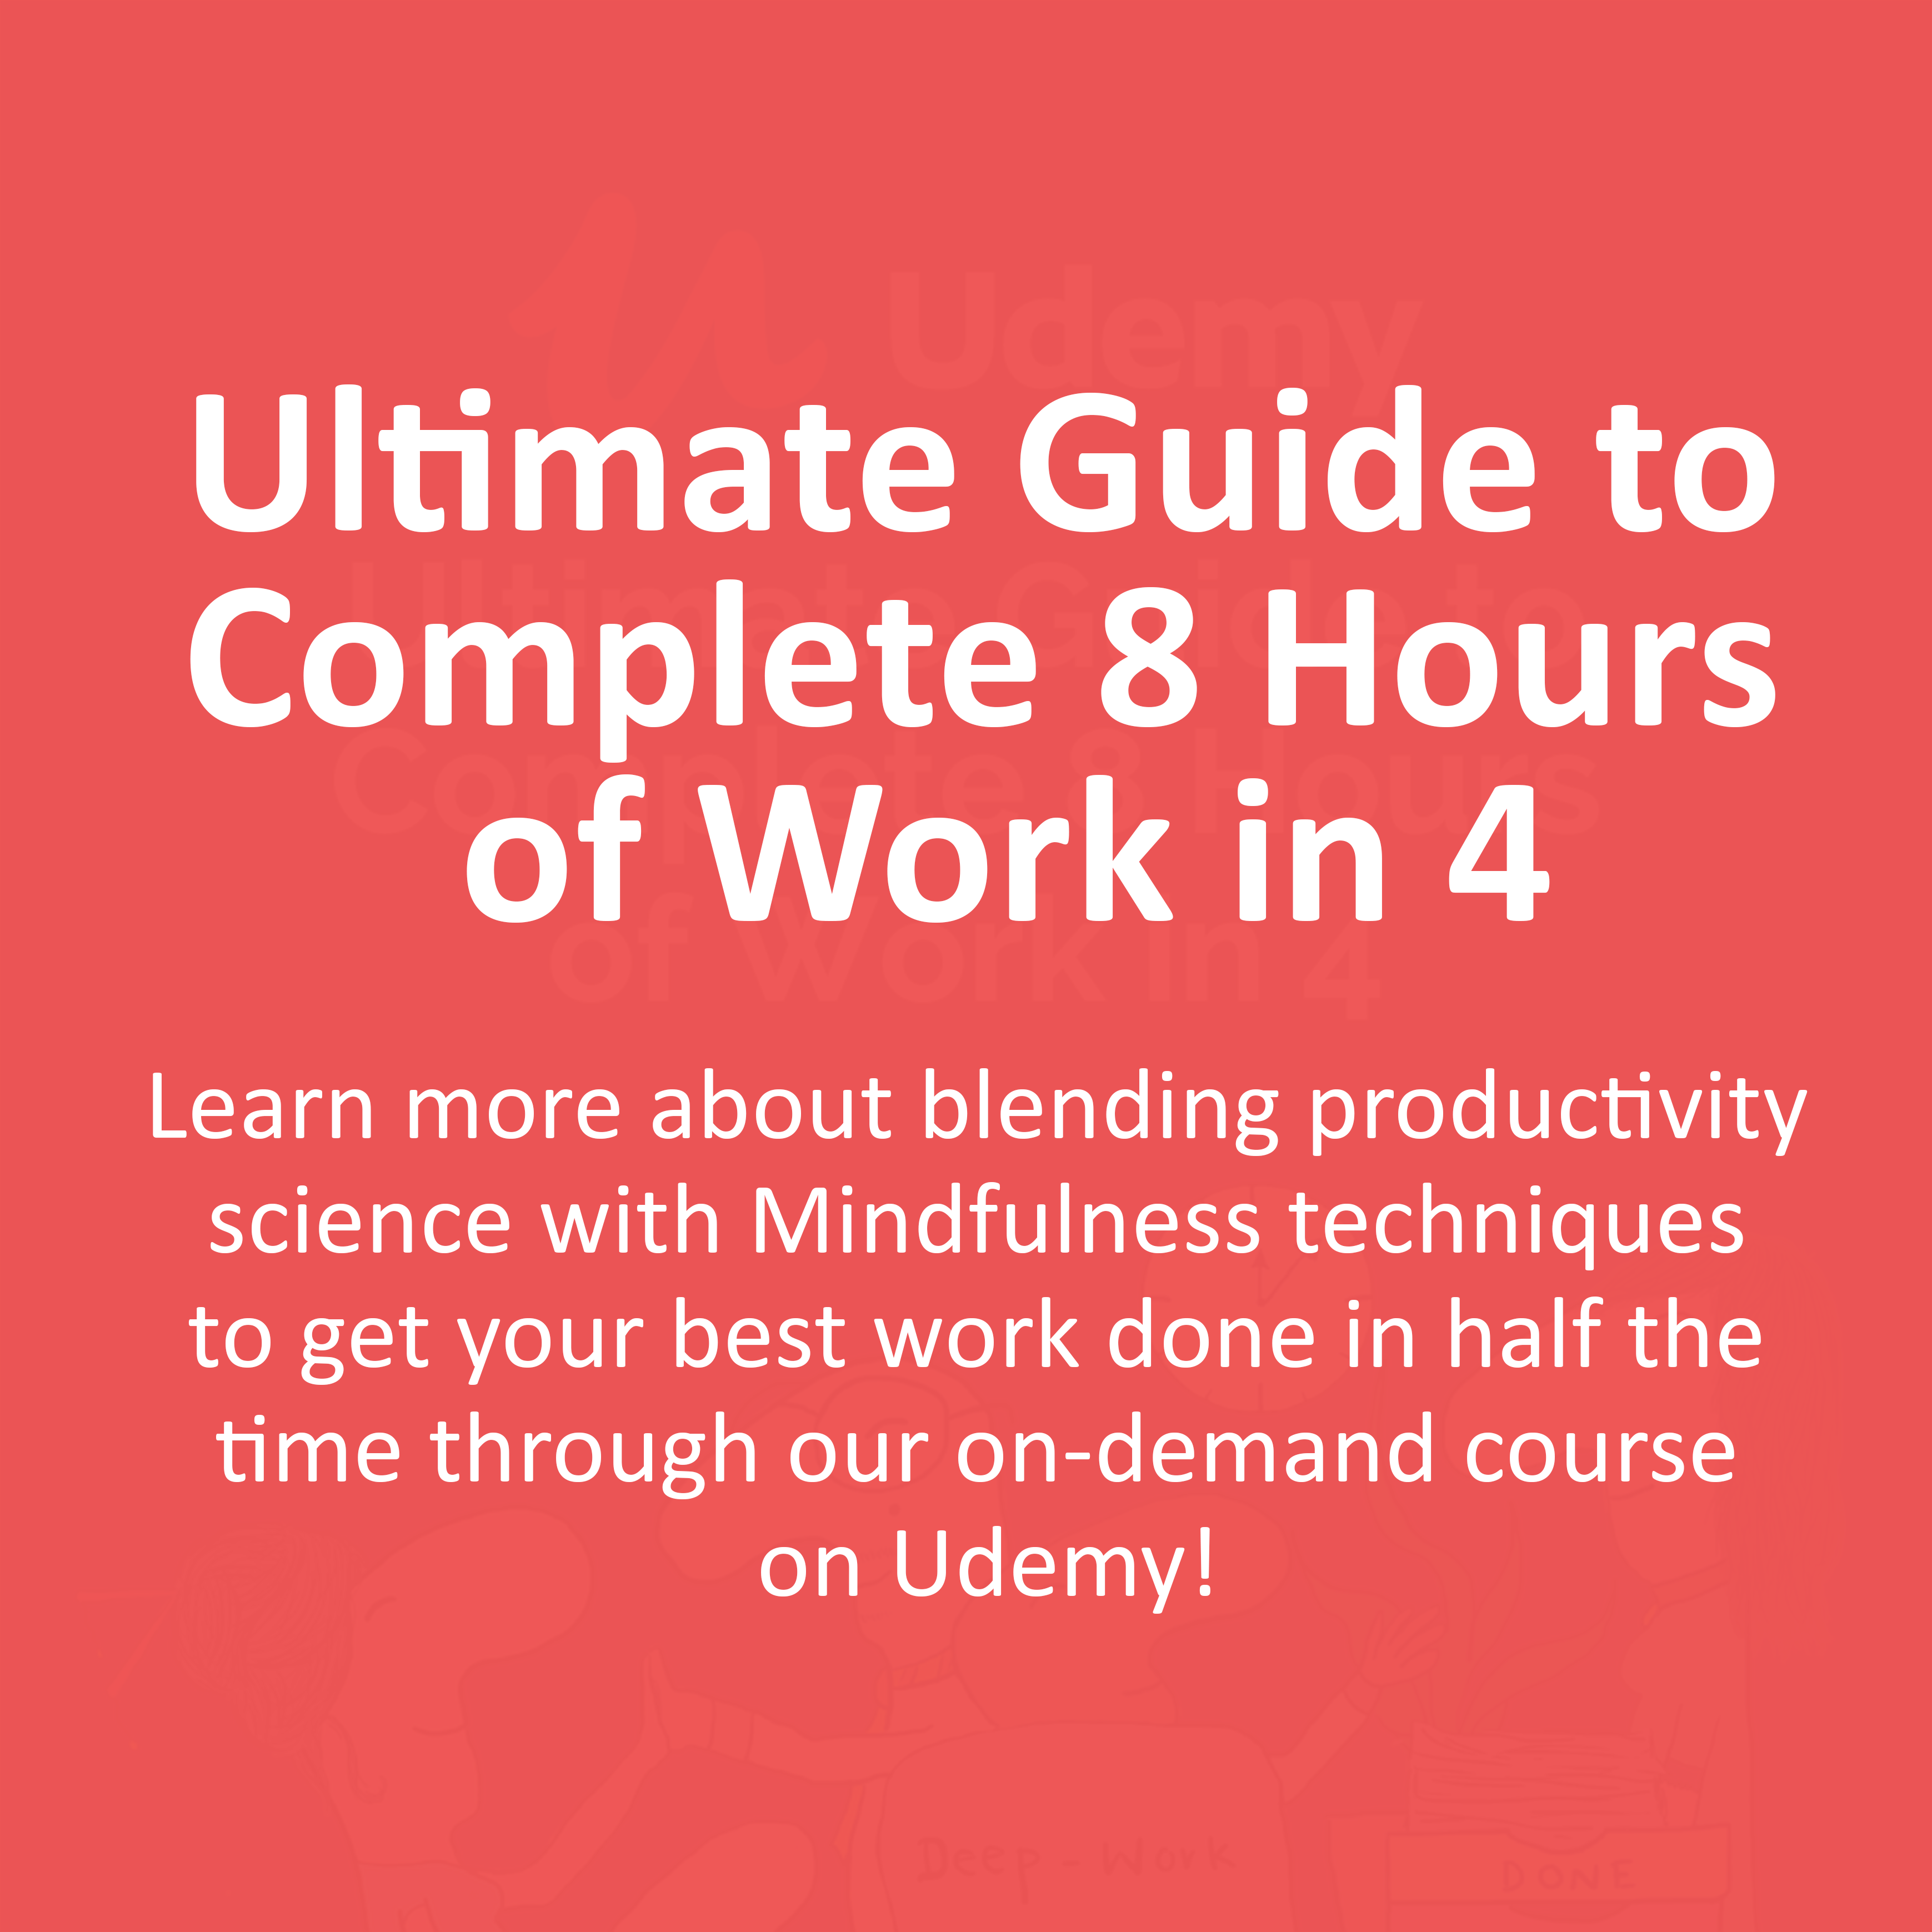 Udemy Course: Ultimate Guide to Complete 8 Hours of Work in 4